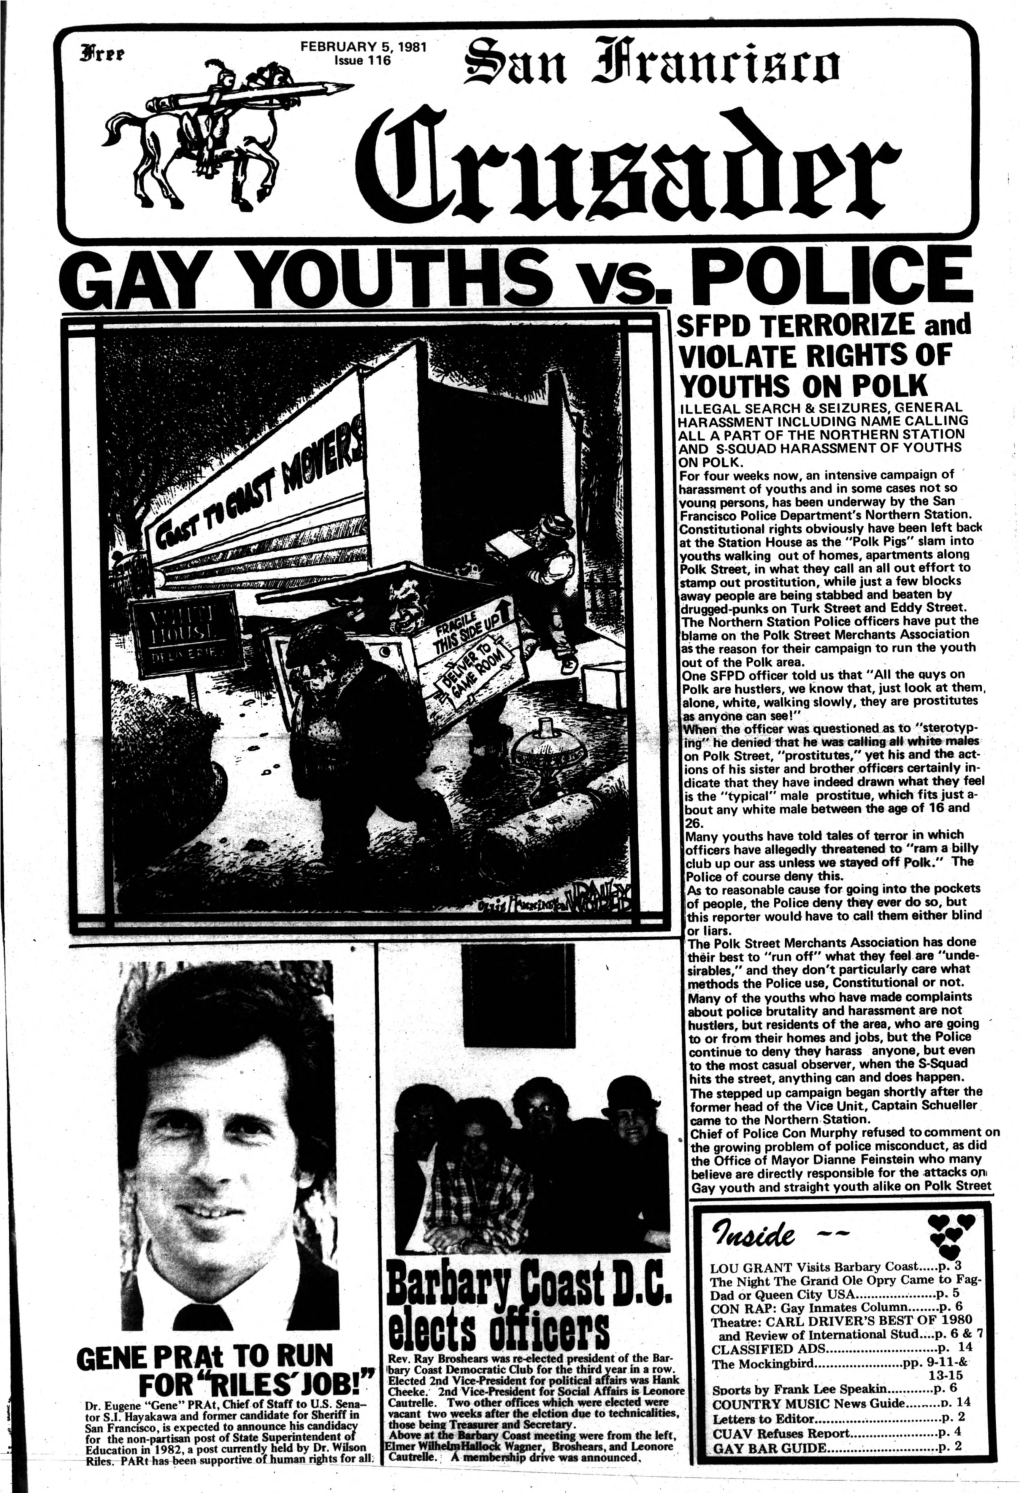 GAY YOUTHS Vs. POLICE